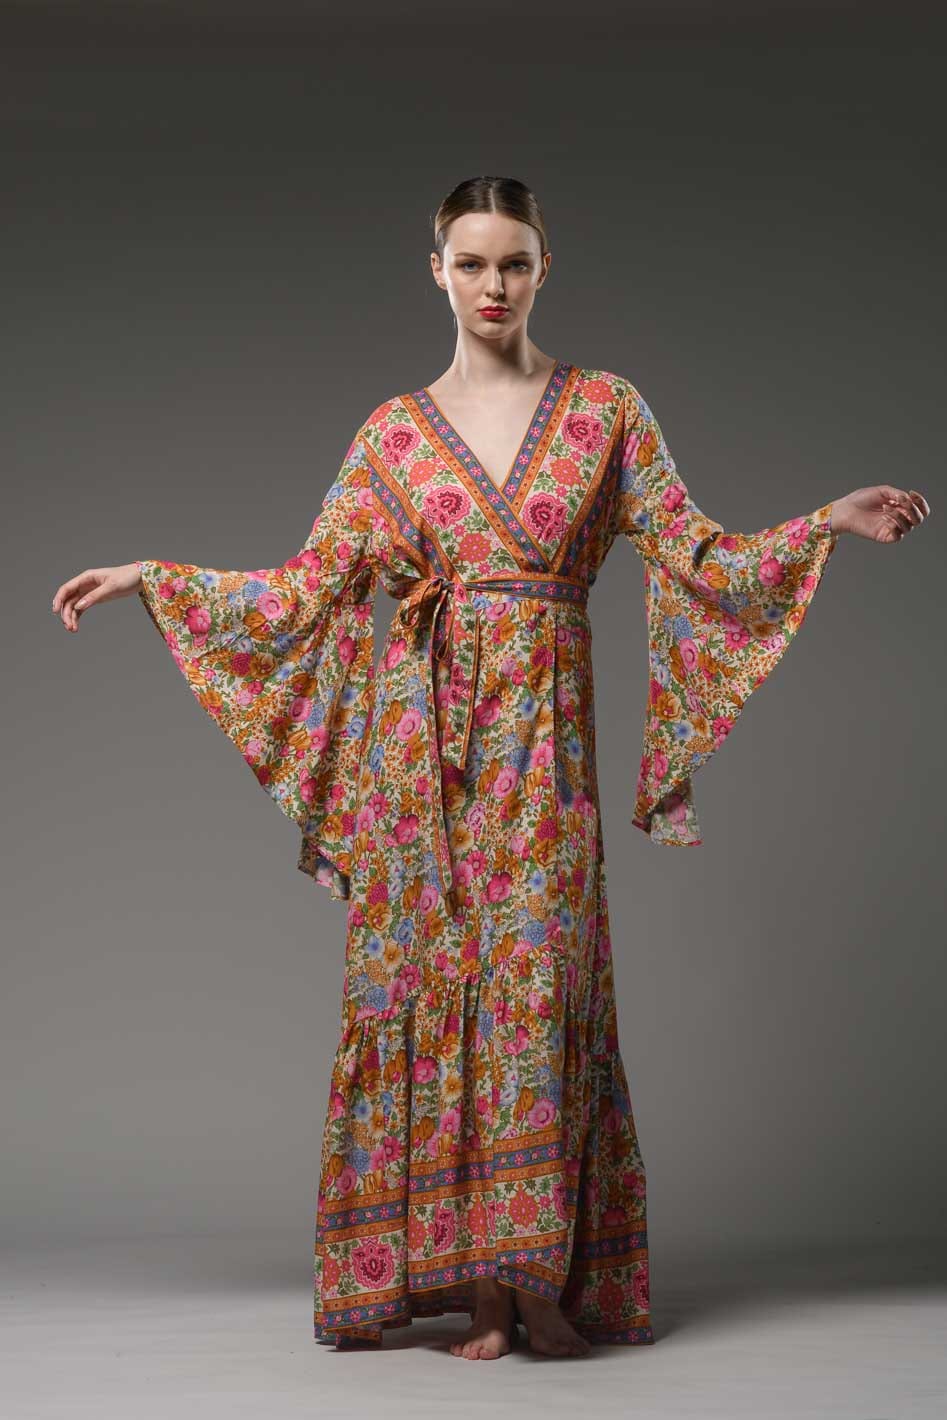 Bohemian style pink floral border printed V neck ruffled self tie waist bell sleeve maxi wrap dress